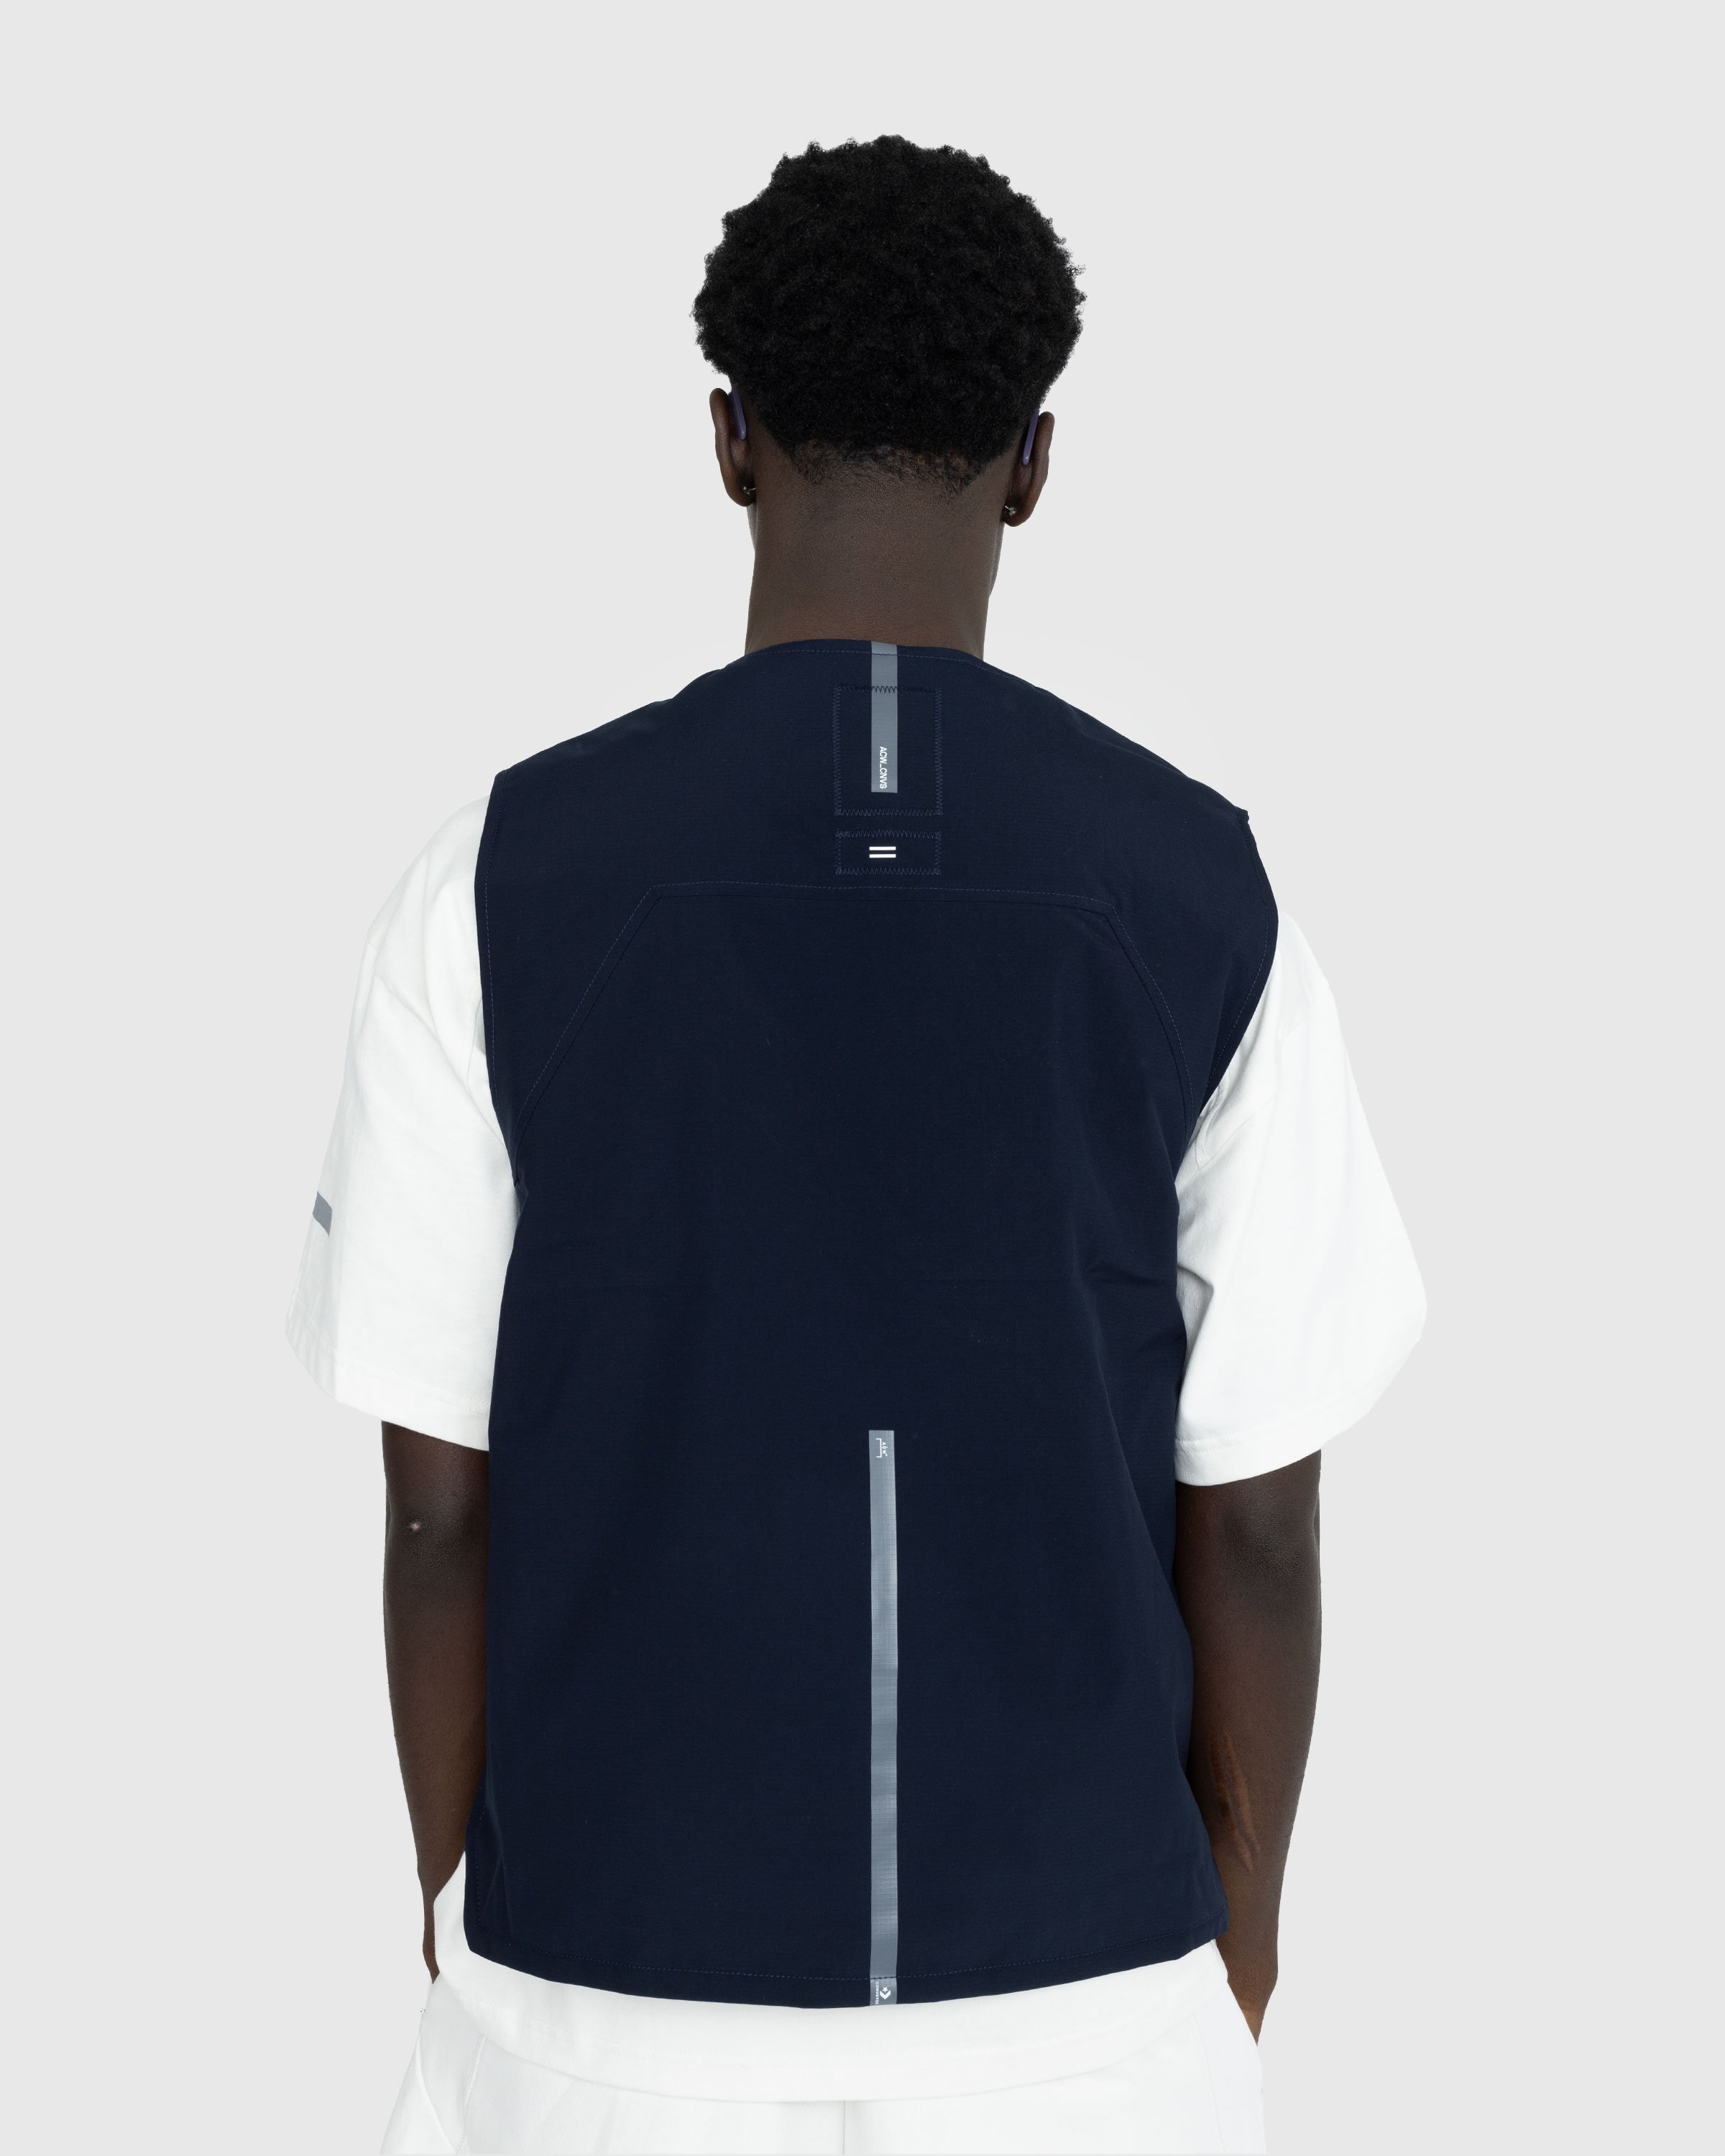 Converse x A-Cold-Wall* - Light Gilet Navy - Clothing - Blue - Image 3